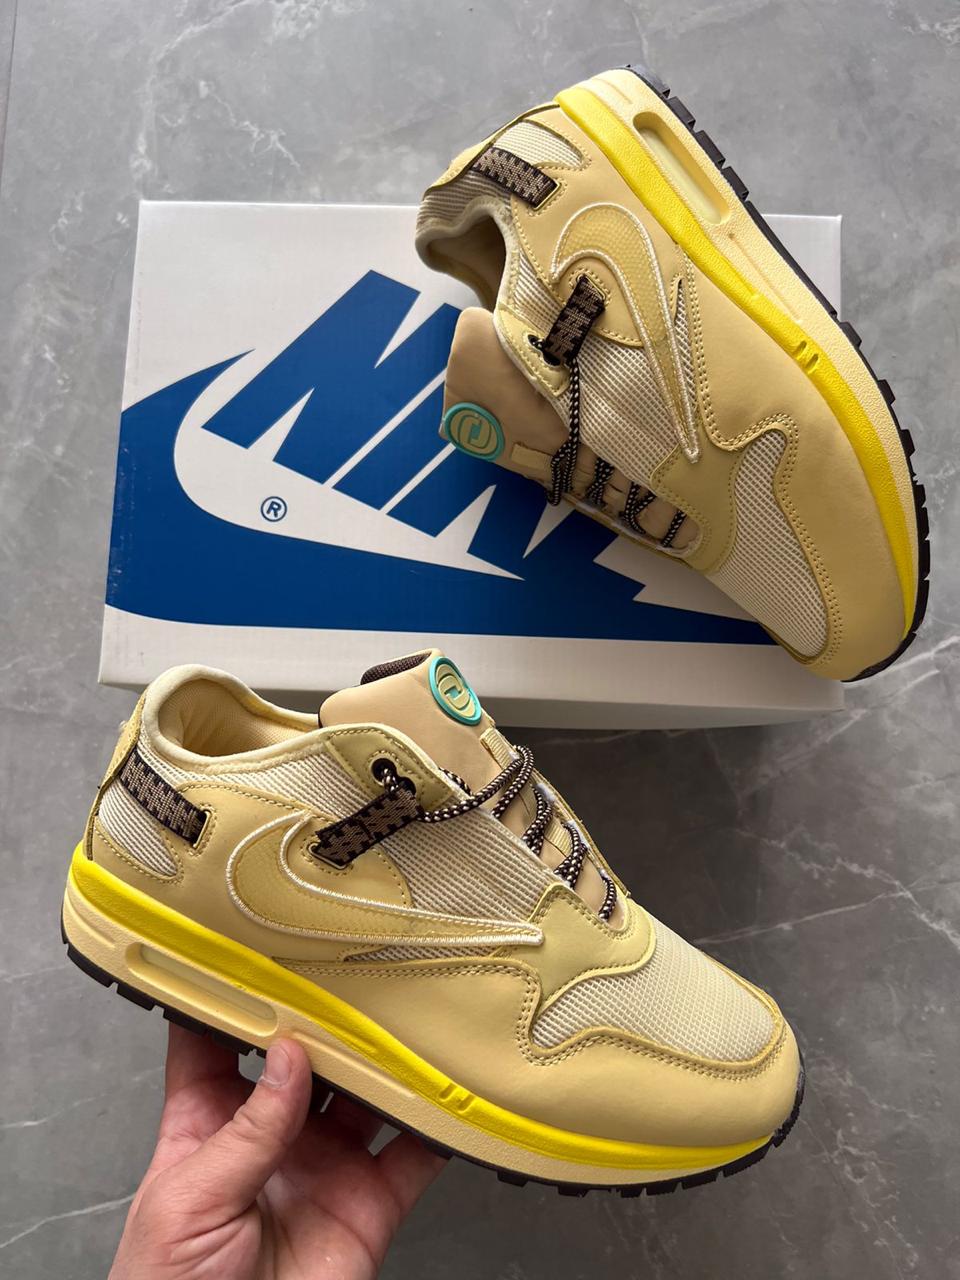 Travis Scott Sneakers Air Max Imported